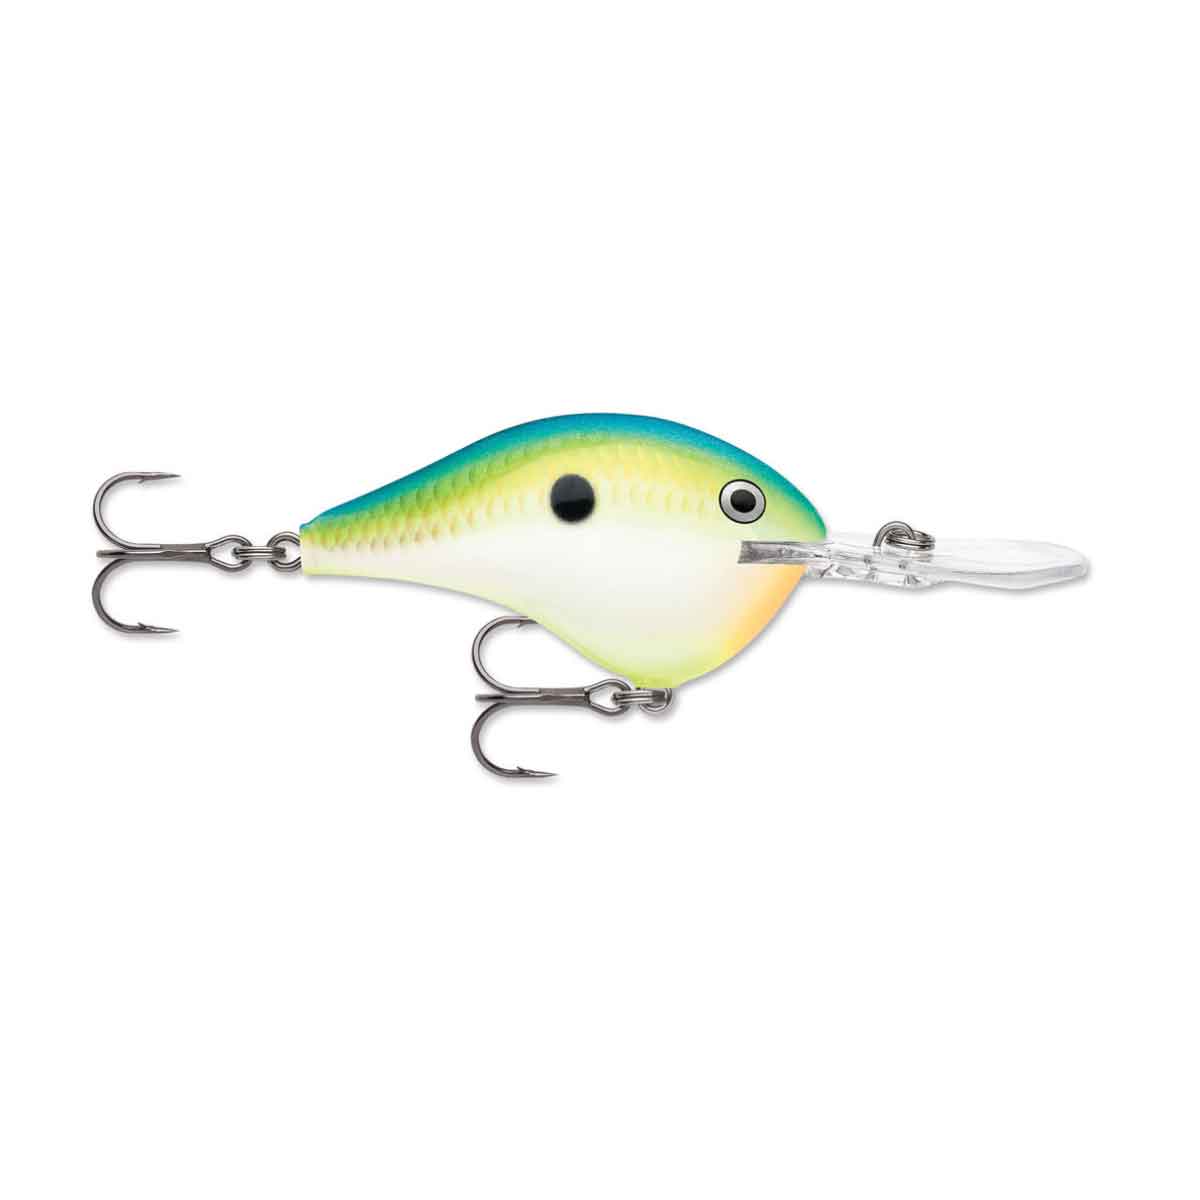 Dives-To_Citrus Shad